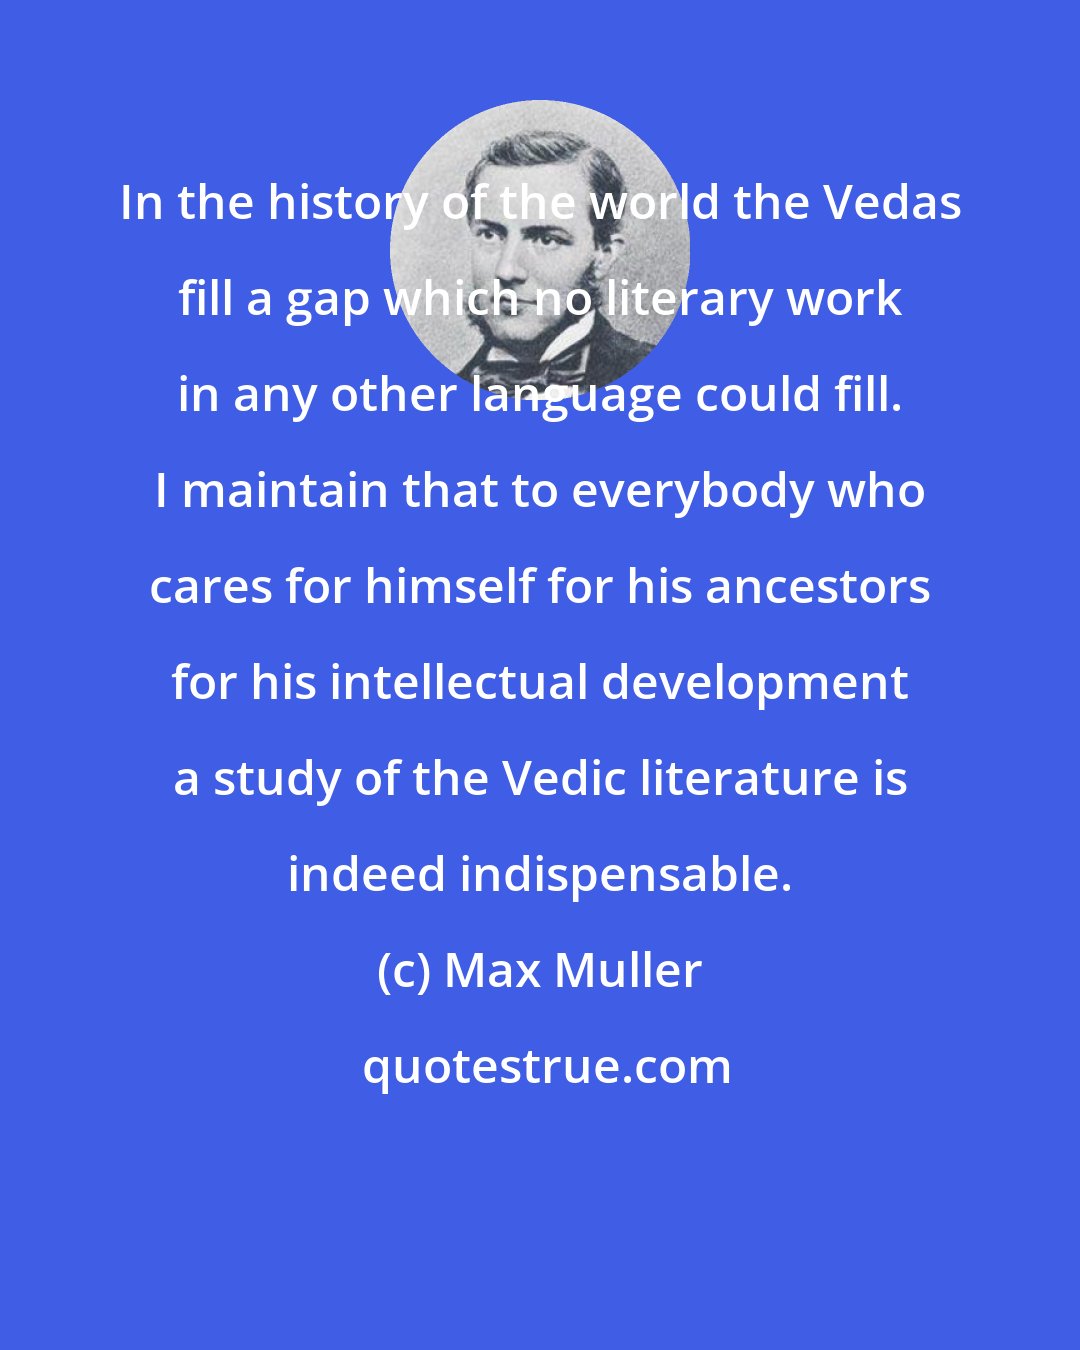 Max Muller: In the history of the world the Vedas fill a gap which no literary work in any other language could fill. I maintain that to everybody who cares for himself for his ancestors for his intellectual development a study of the Vedic literature is indeed indispensable.